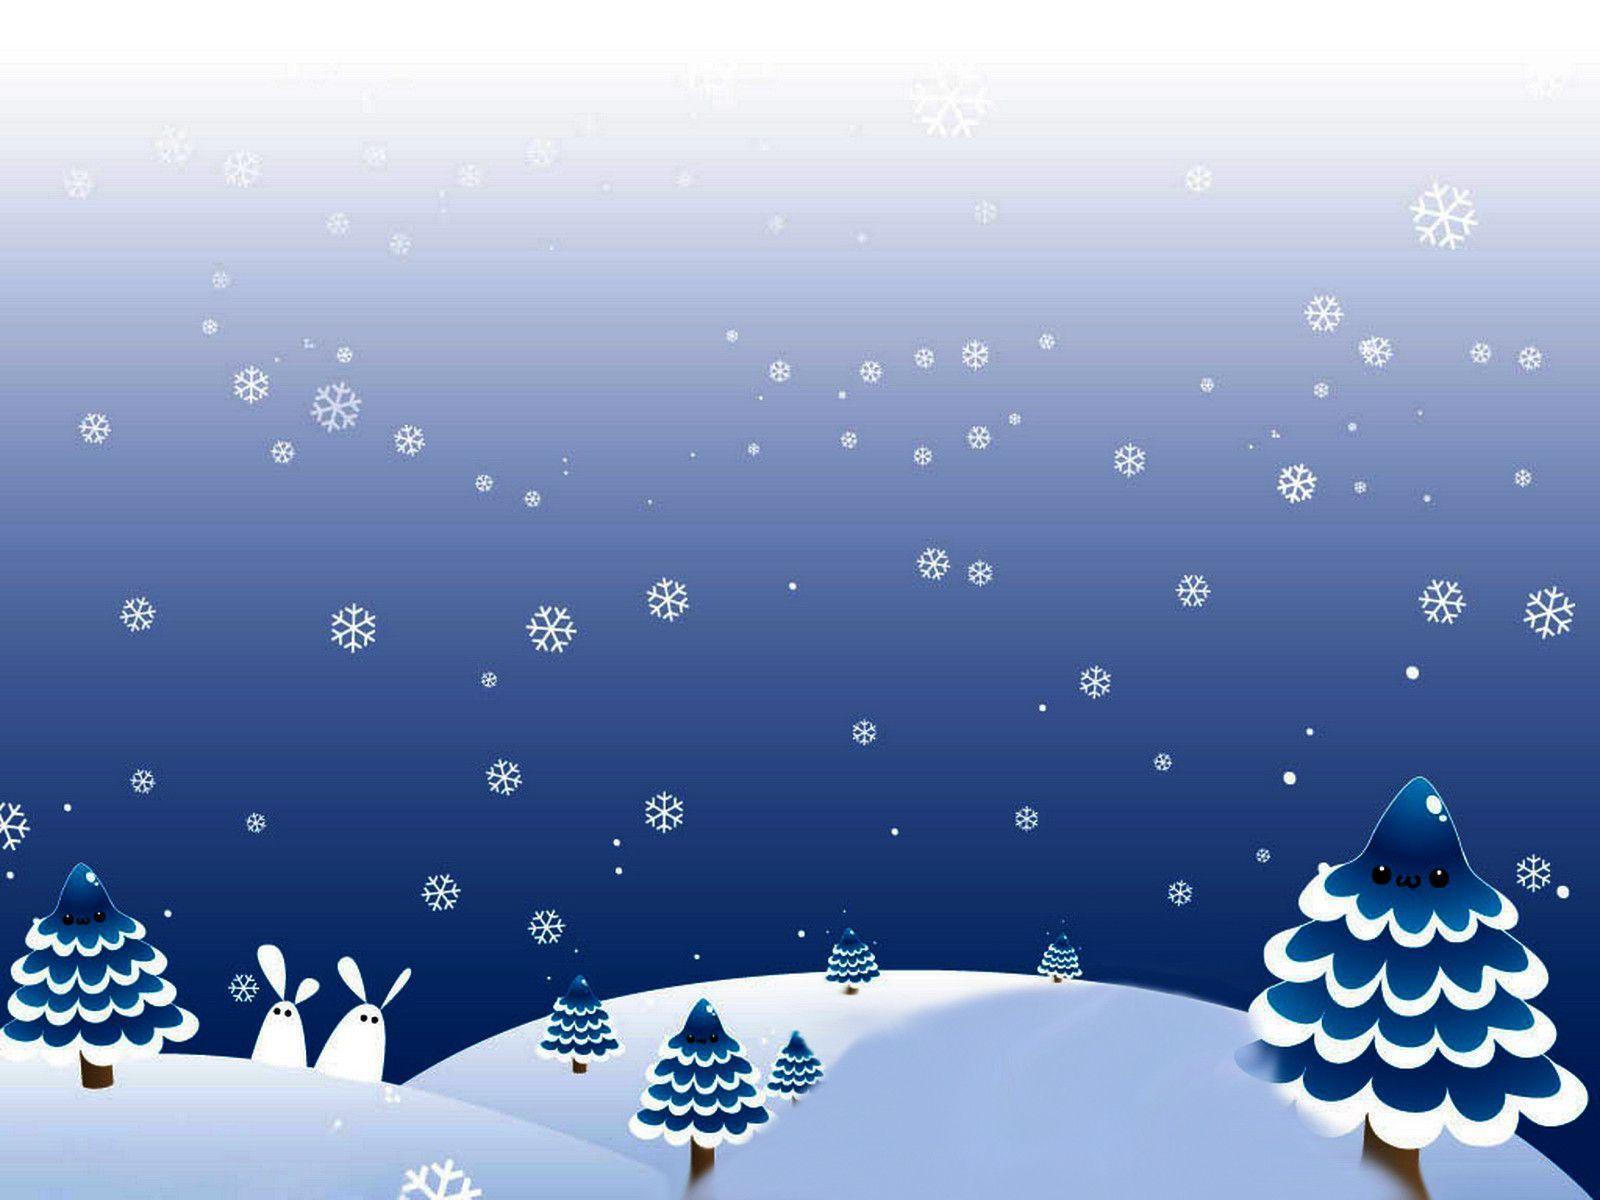 Free Winter Christmas Day Background For PowerPoint